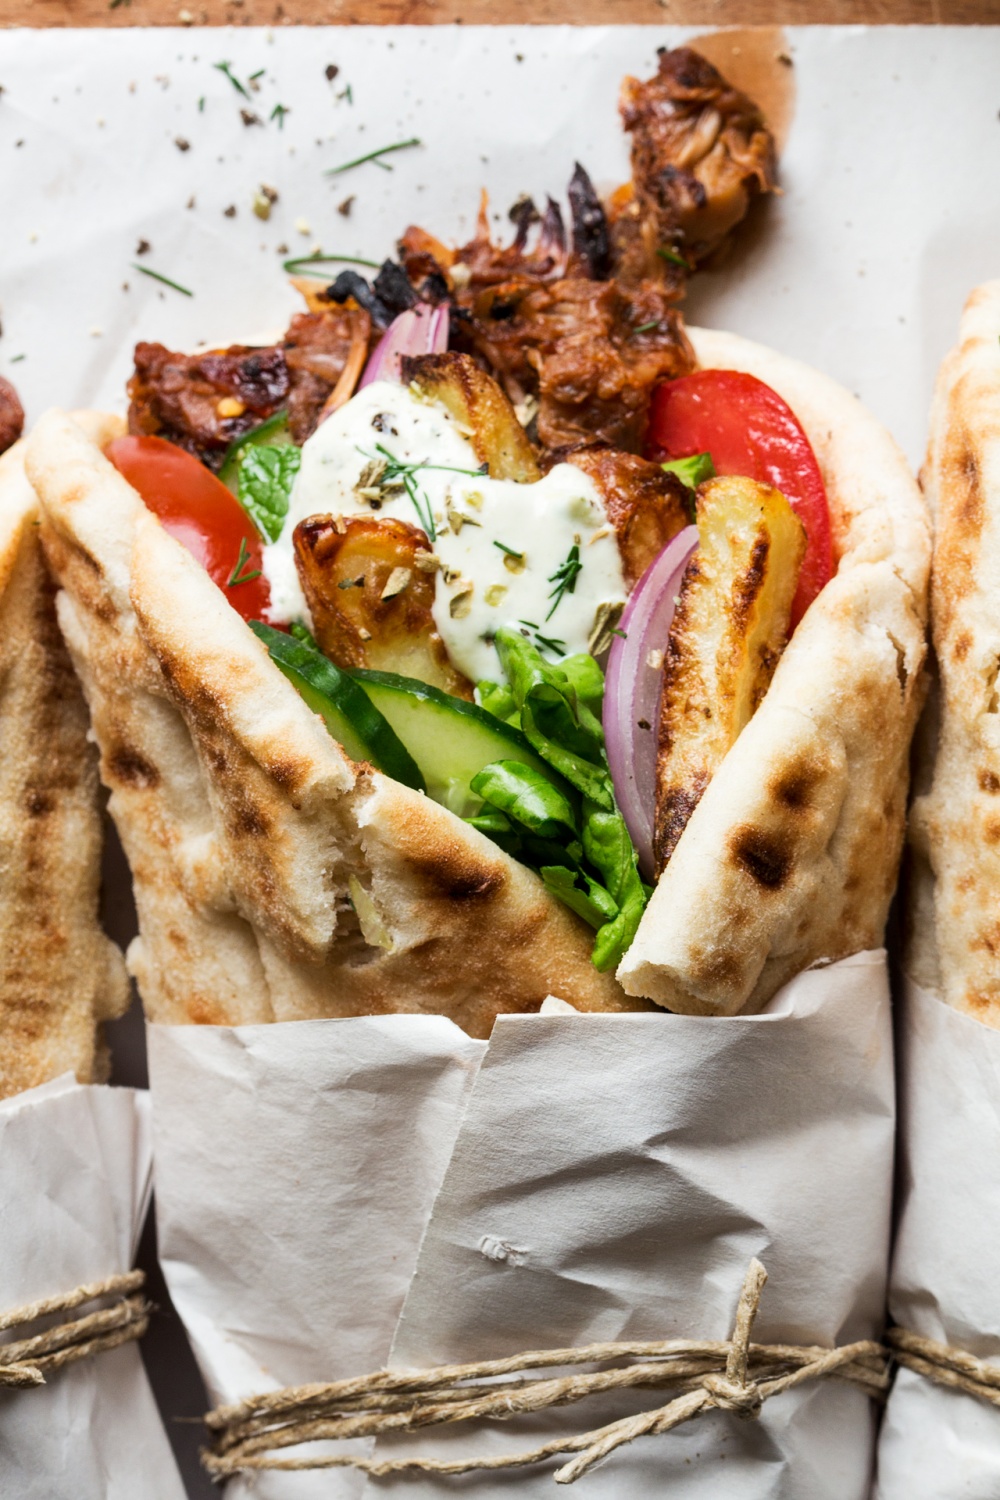 Yes, You Can Make Gyros at Home